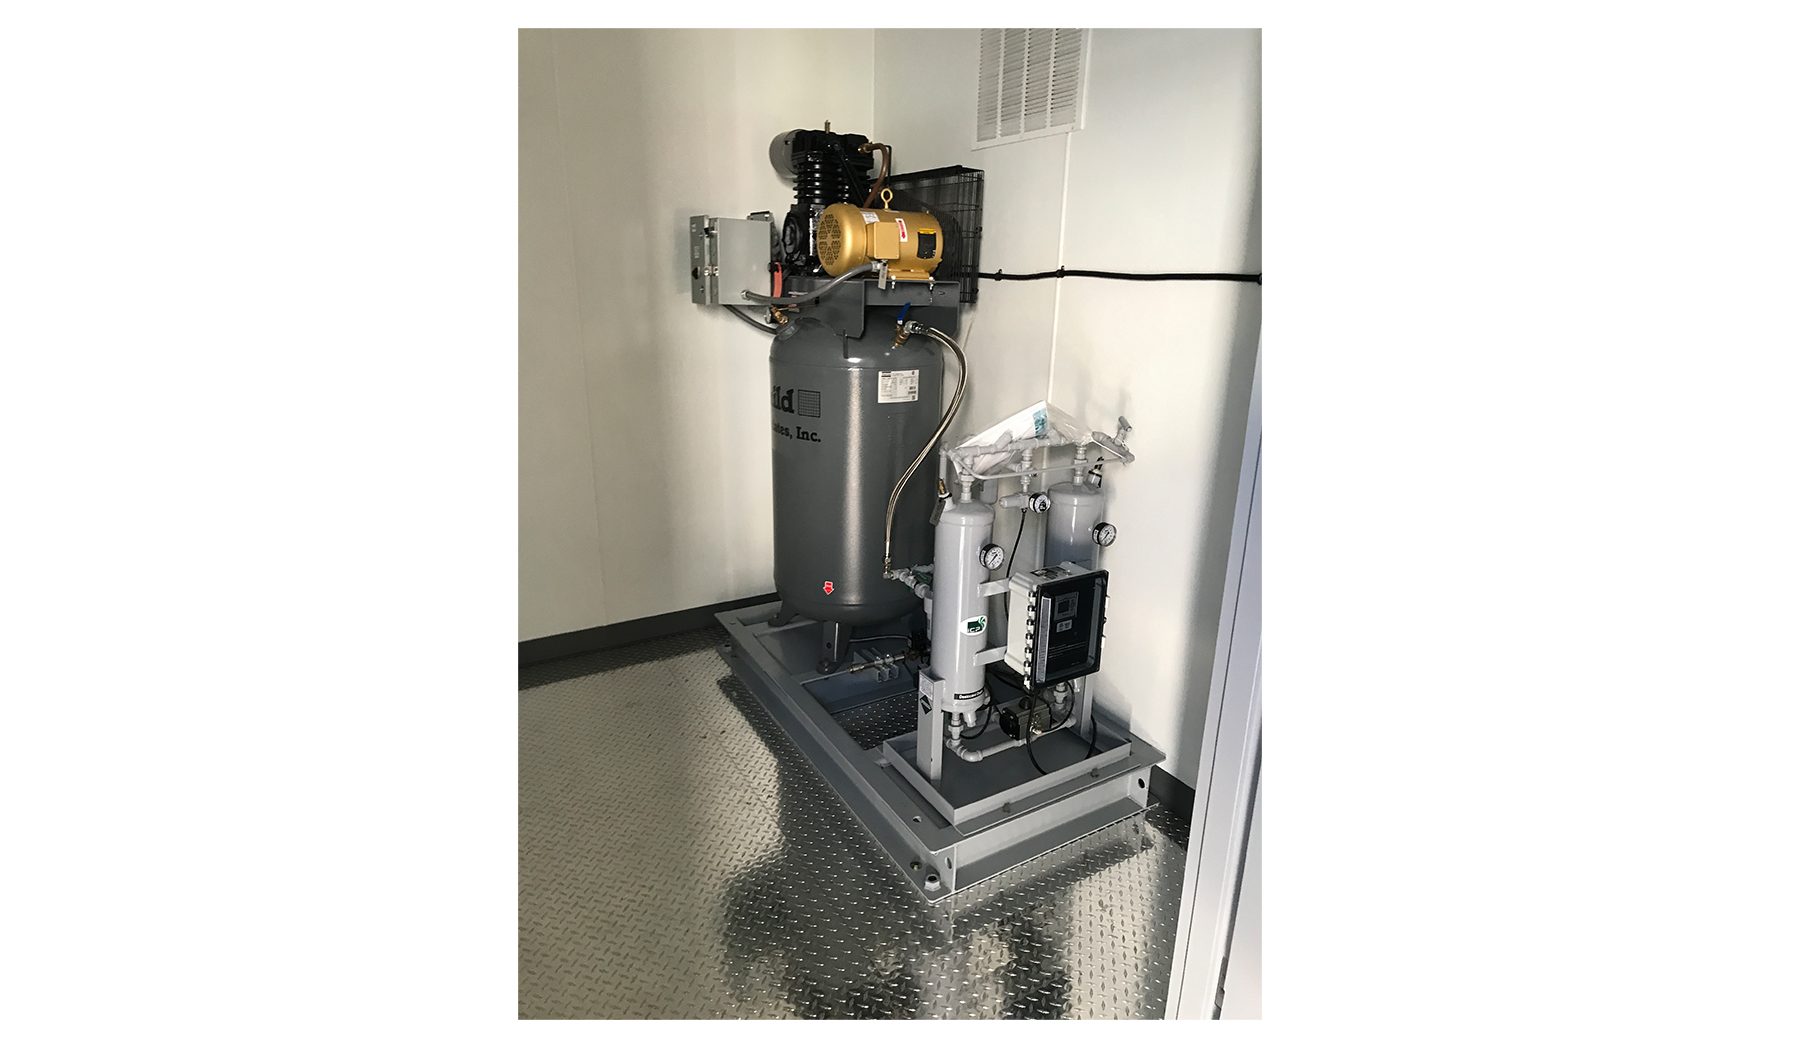 Electrical Rooms can utilize pumps and compressors